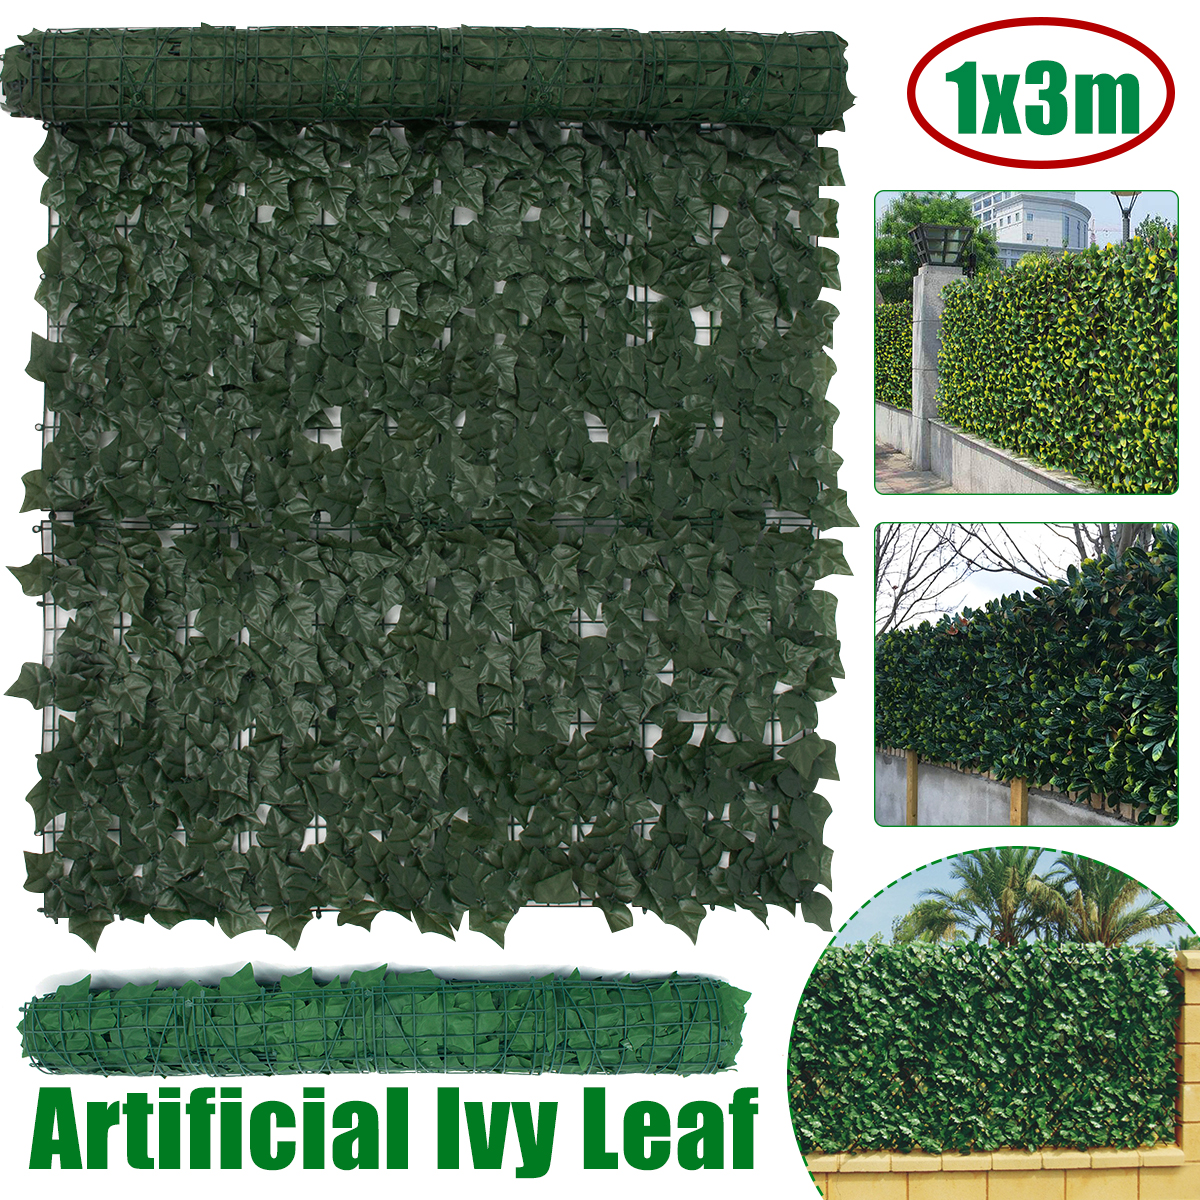 13m-Artificial-Plant-Foliage-Hedge-Grass-Mat-Greenery-Panel-Decor-Wall-Fence-Carpet-Real-Touch-Lawn--1934834-1